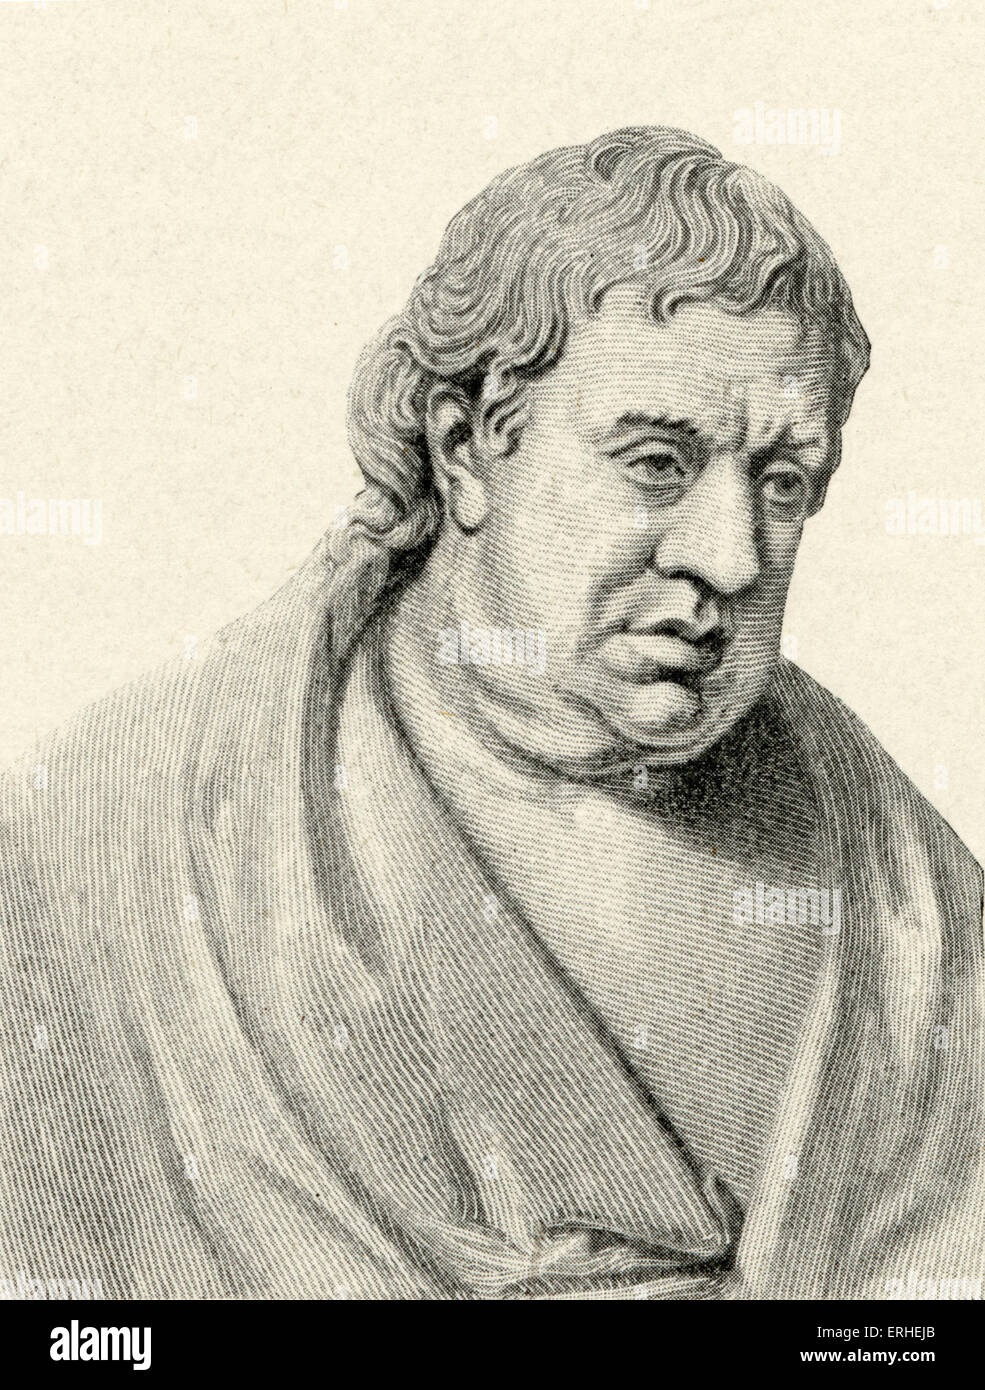 Samuel Johnson, known as Dr Johnson - English writer, critic, lexicographer, and conversationalist Engraving from the bust by J Stock Photo